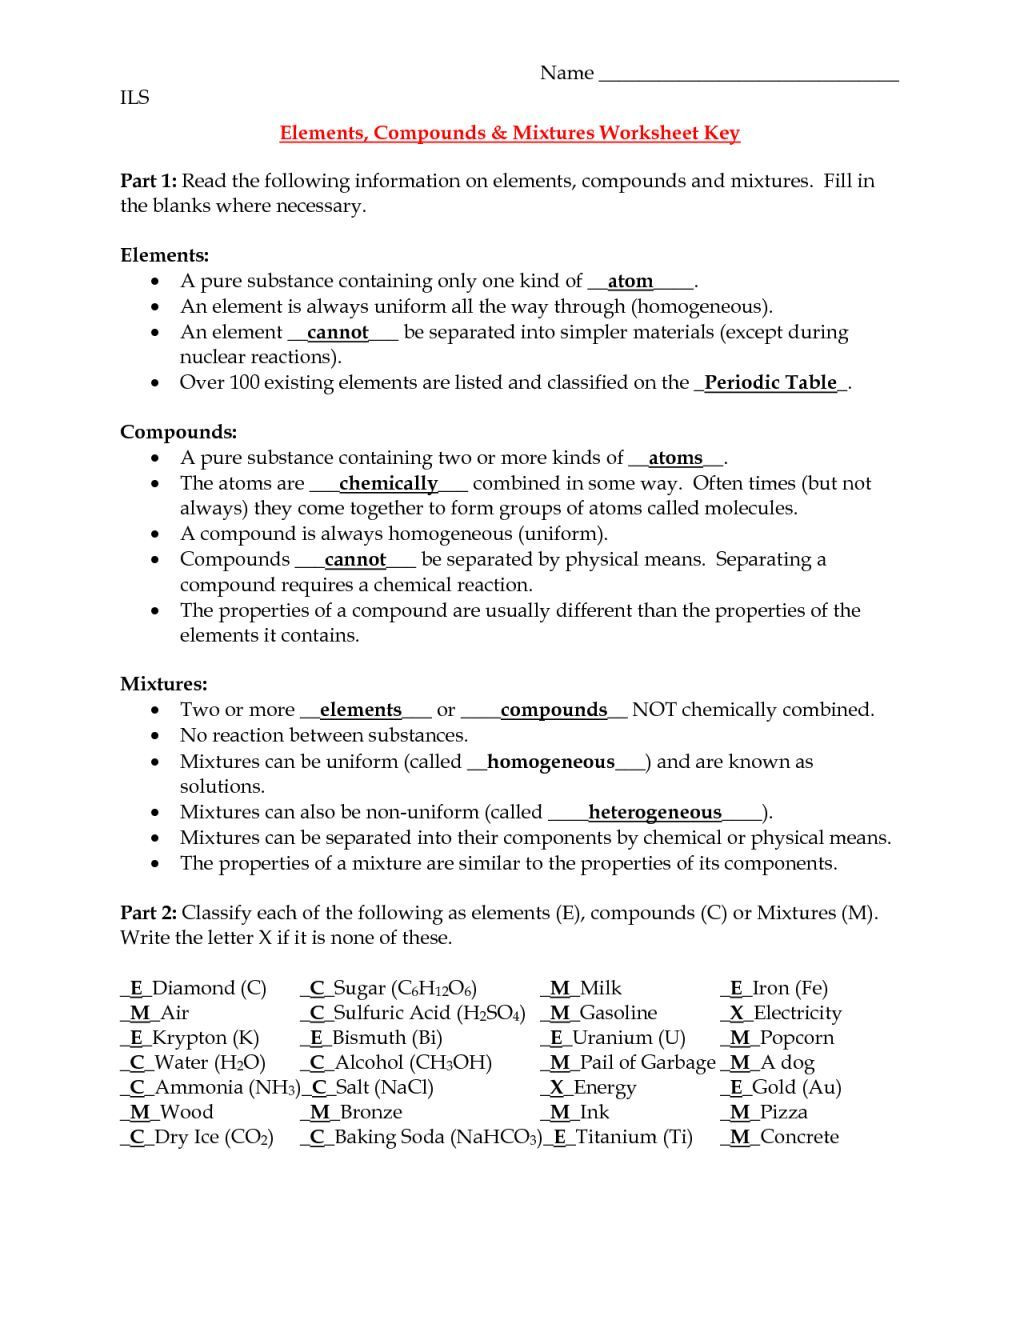 Element Compound Mixture Worksheet Elements Pounds and Mixtures Worksheet Middle School